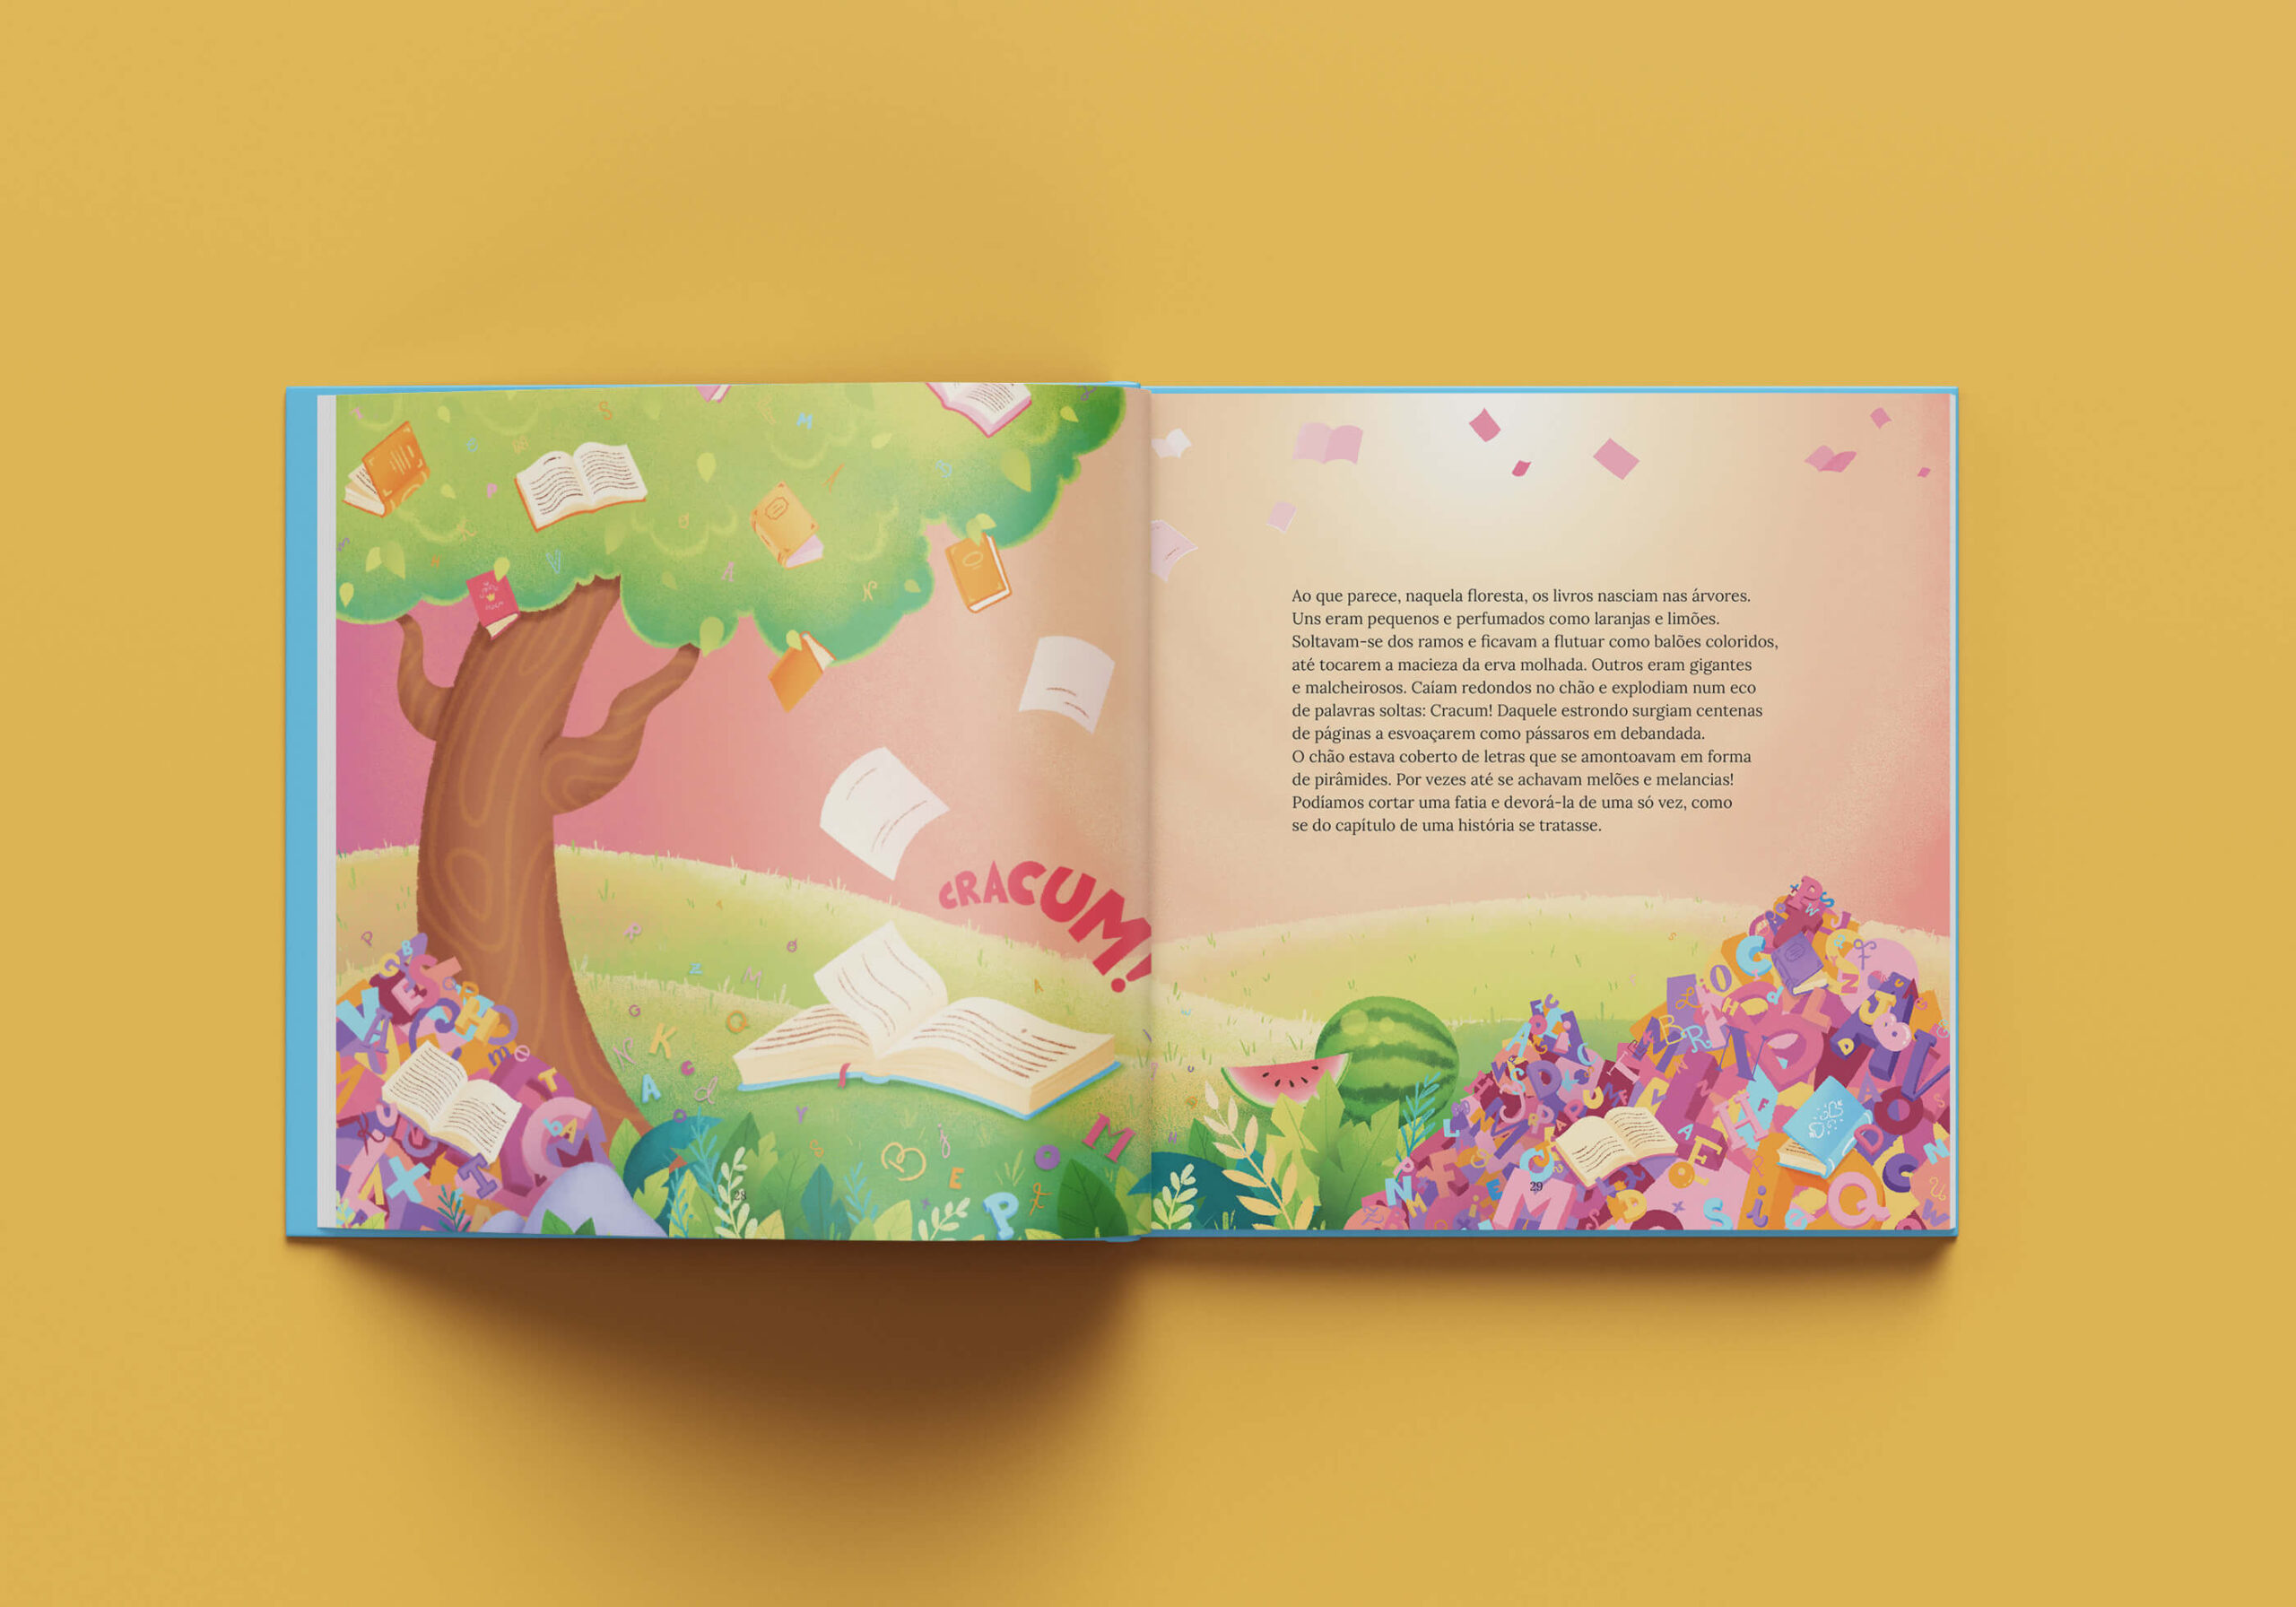 editorial-design-children-book-lets-tell-a-story-vol-2 Large